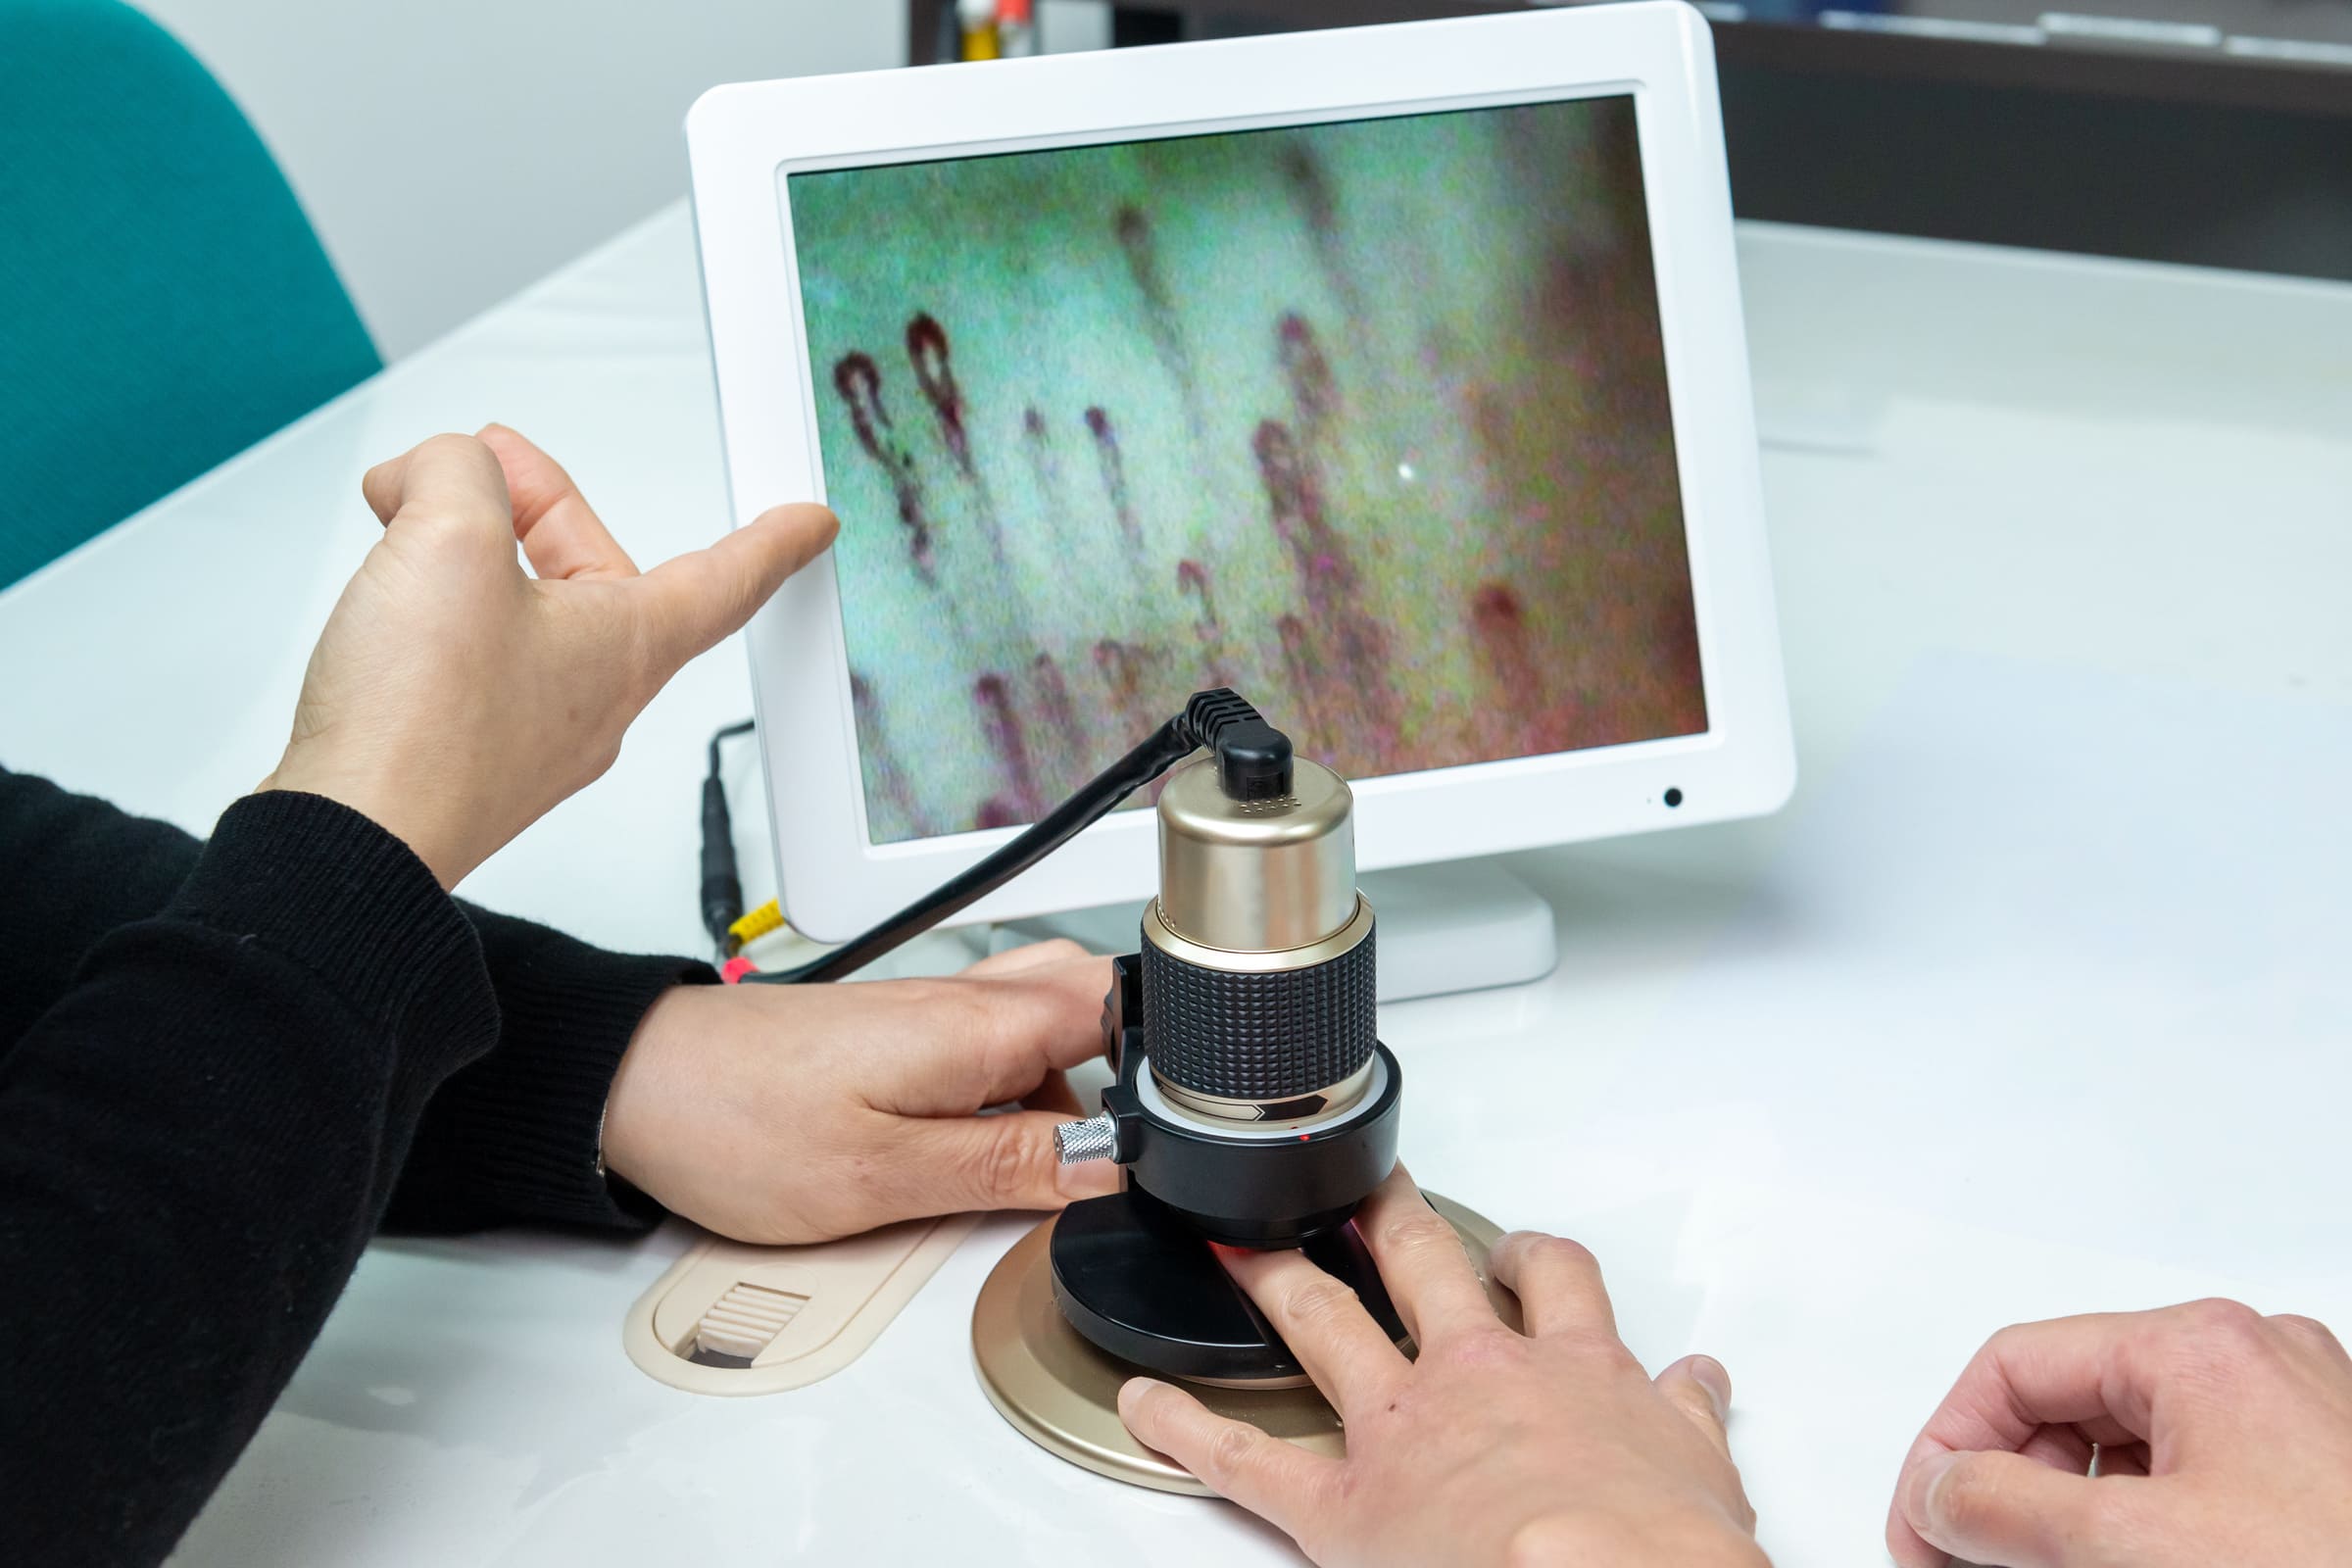 Capillaroscopy procedure - The doctor examines the patient nailbed with a microscope